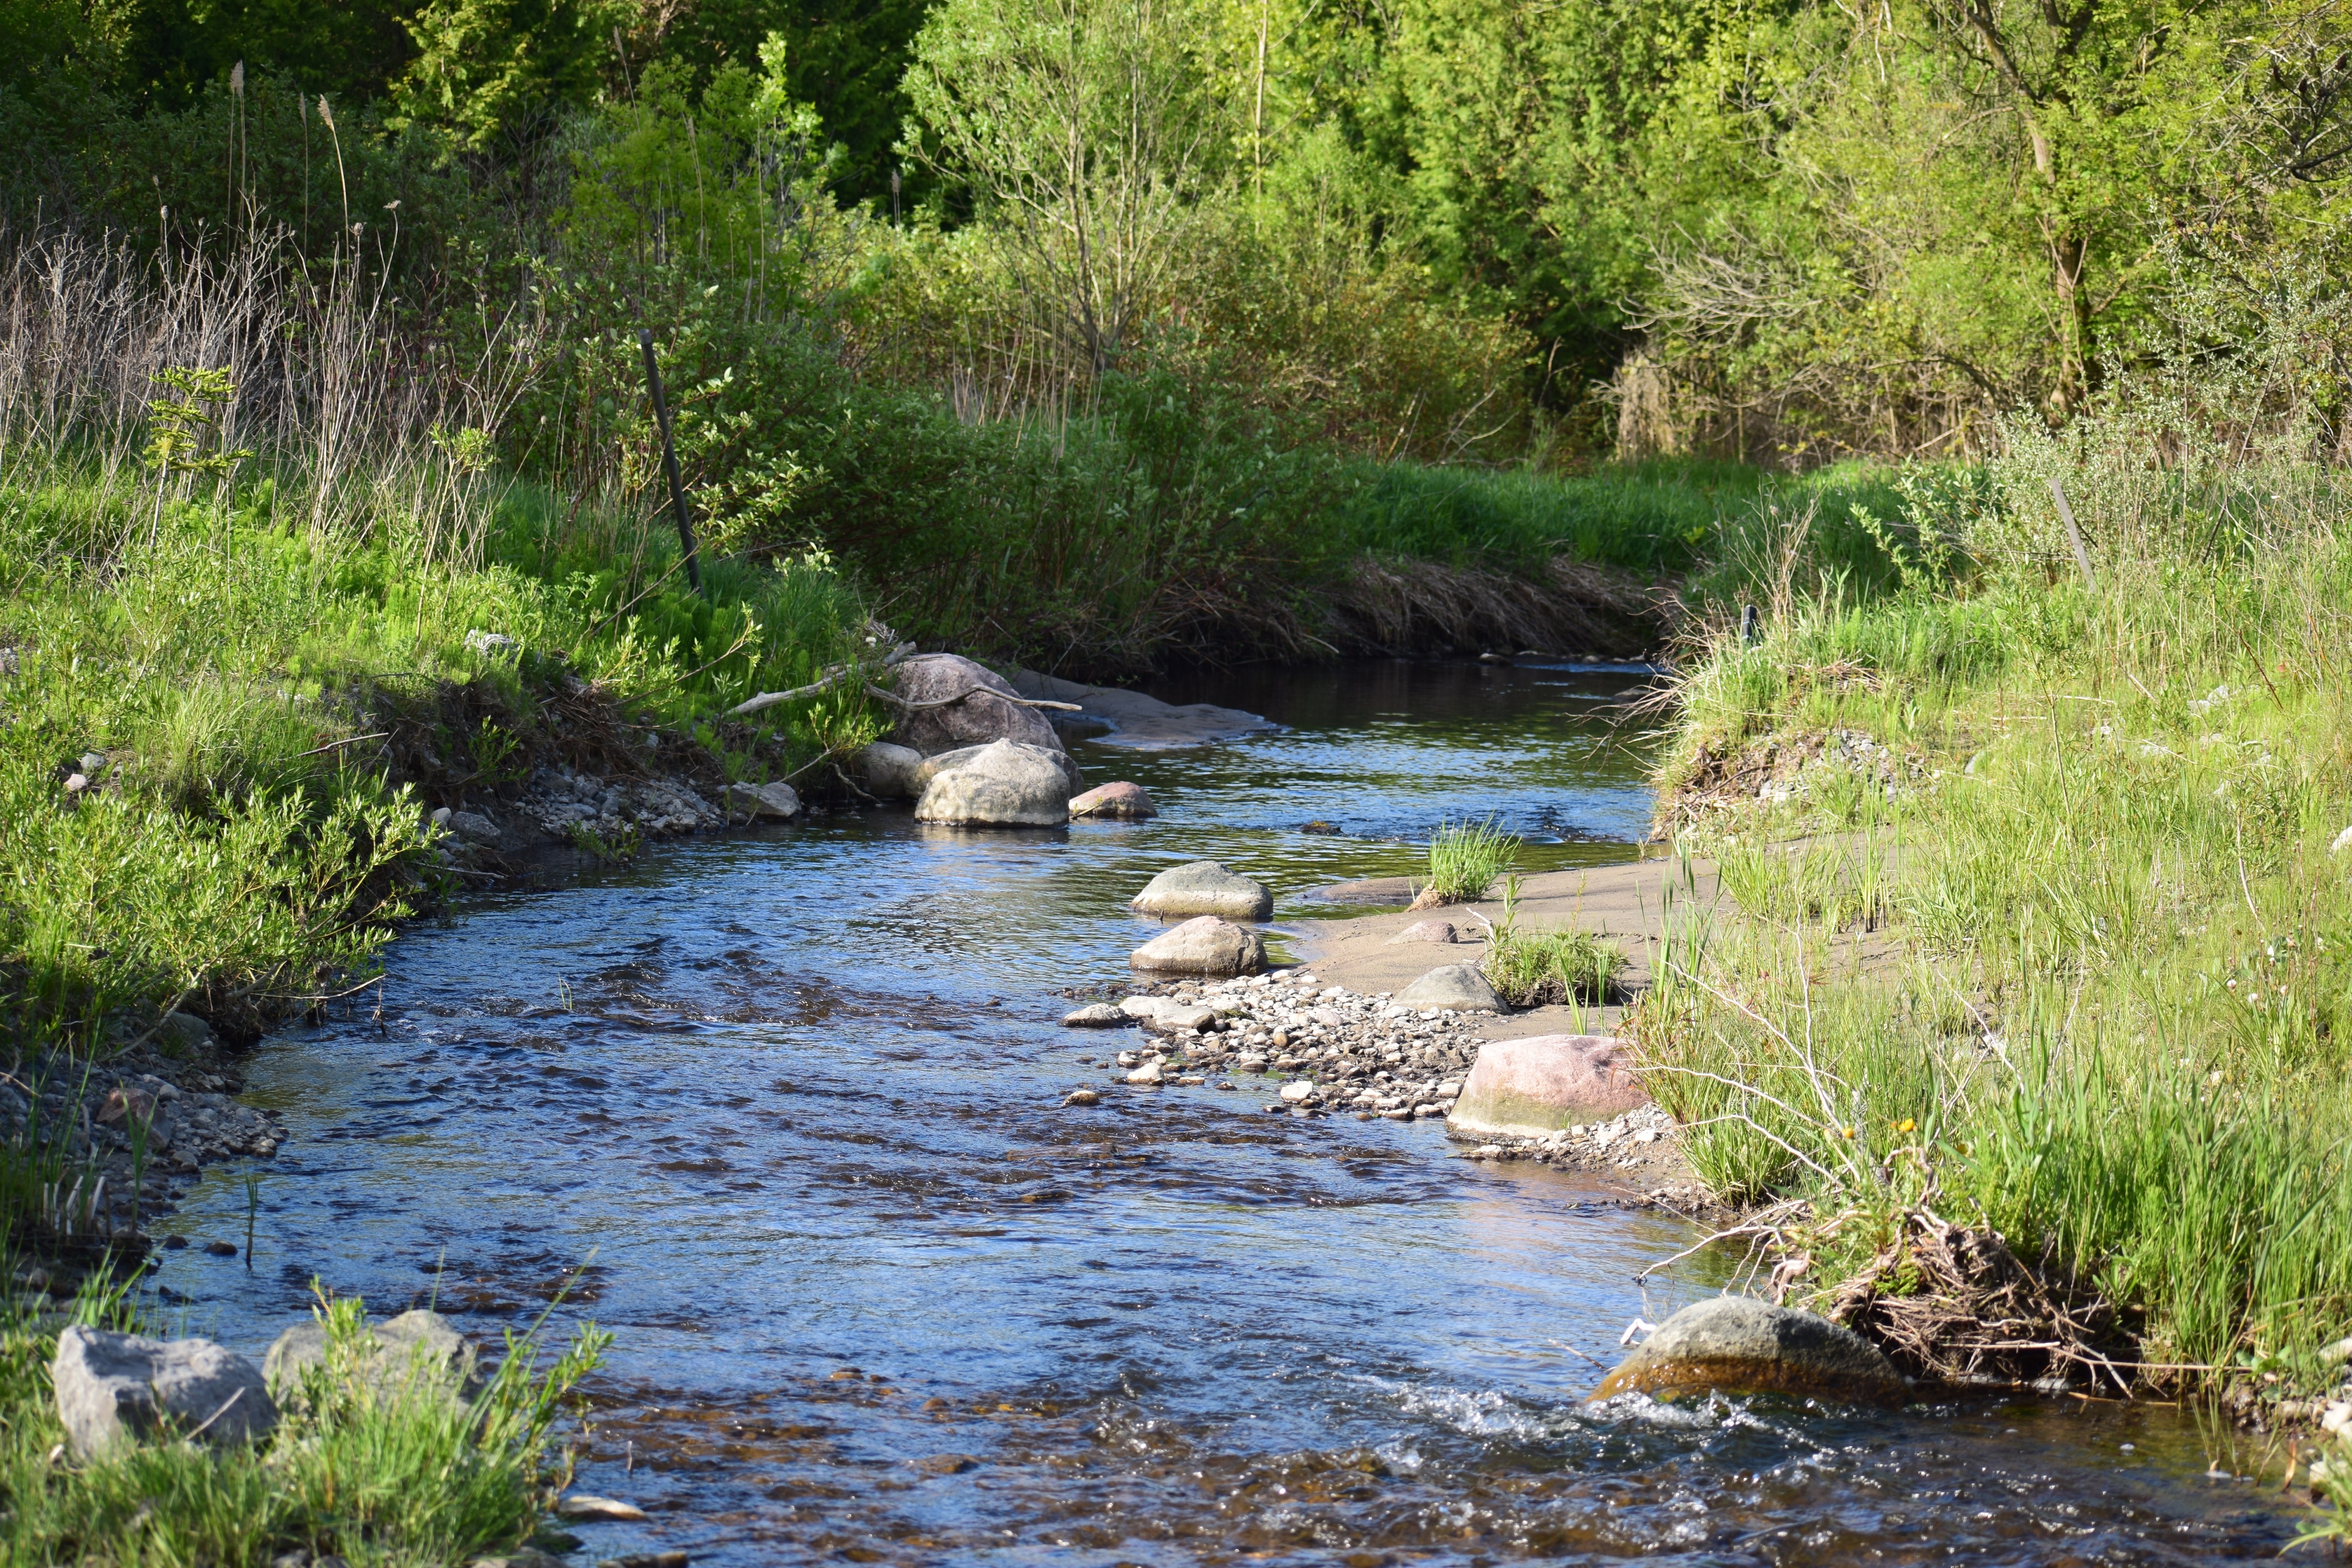 Wesleyville Creek is one of the highest quality cold water streams on the north shore of Lake Ontario.